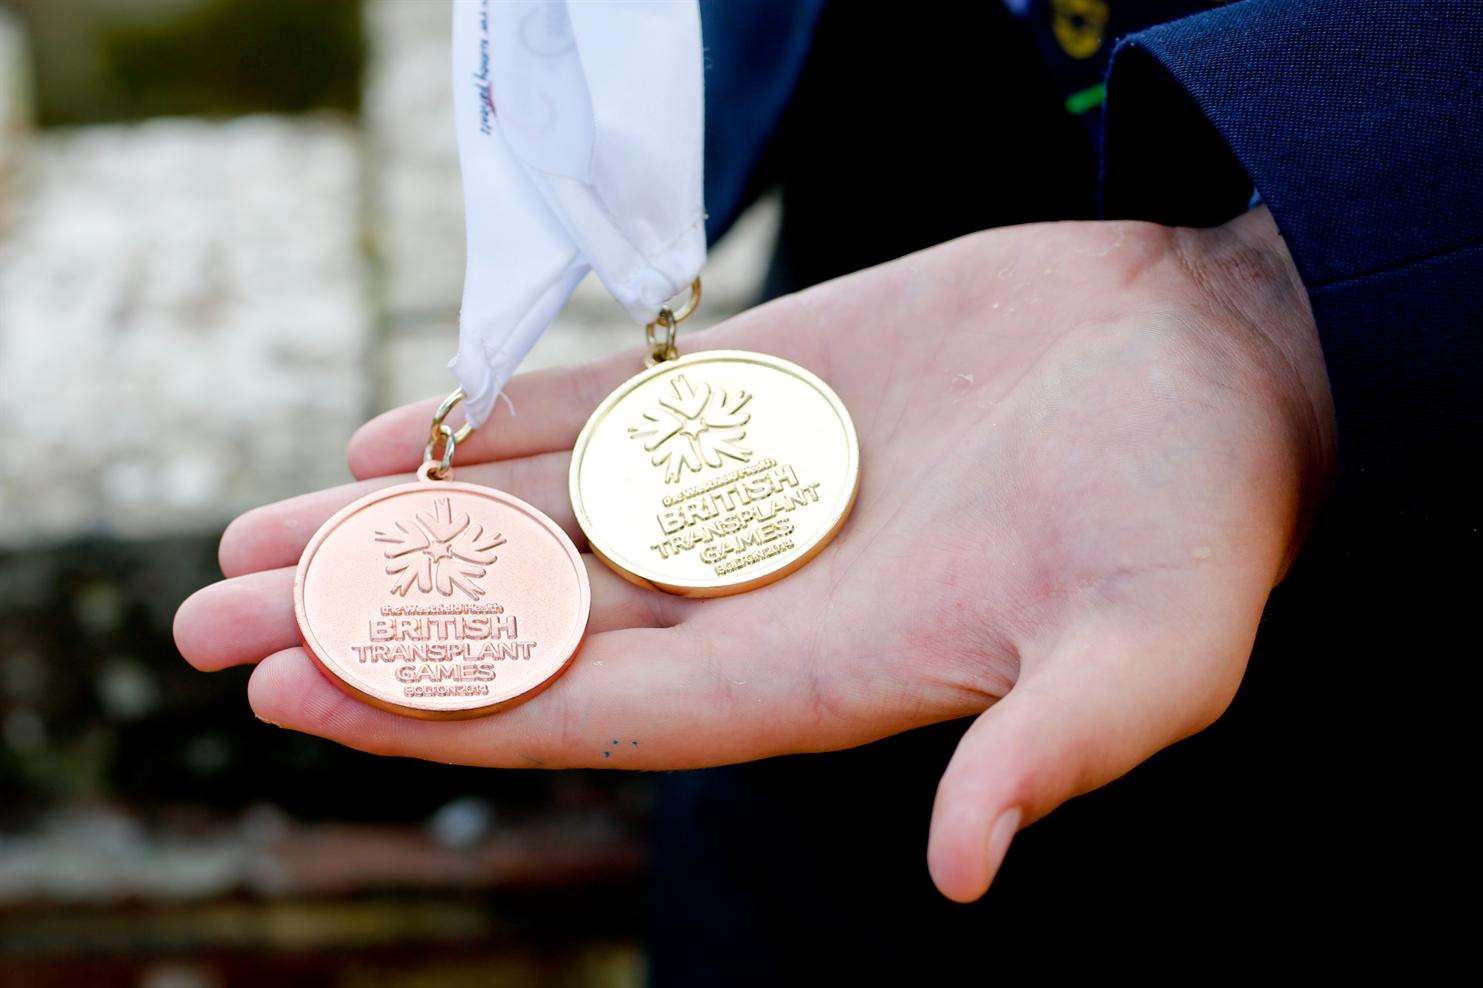 Ben's gold and bronze medals from this year's games in Bolton